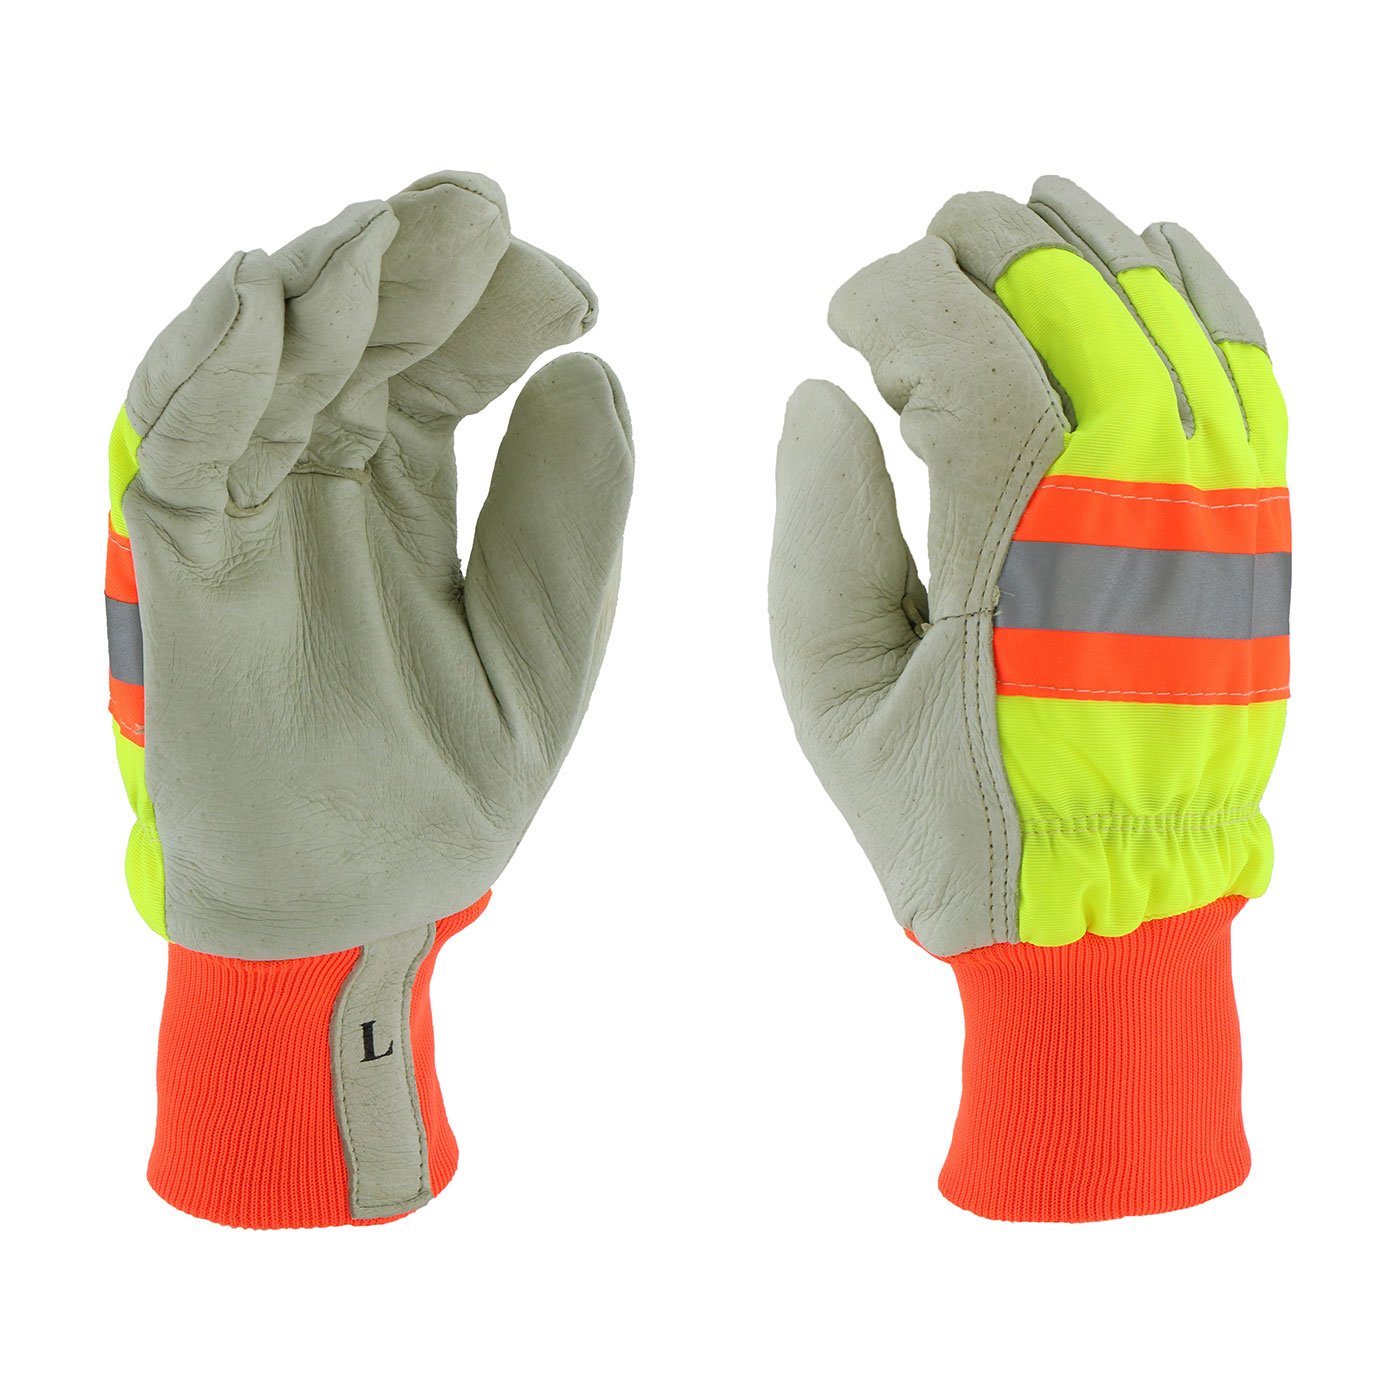 #HVY1555 PIP® West Chester Top Grain Pigskin Leather Palm Glove with Hi-Vis Nylon Back, Retro-Reflective Stripe, Posi-Therm® Liner and Knit Wrists